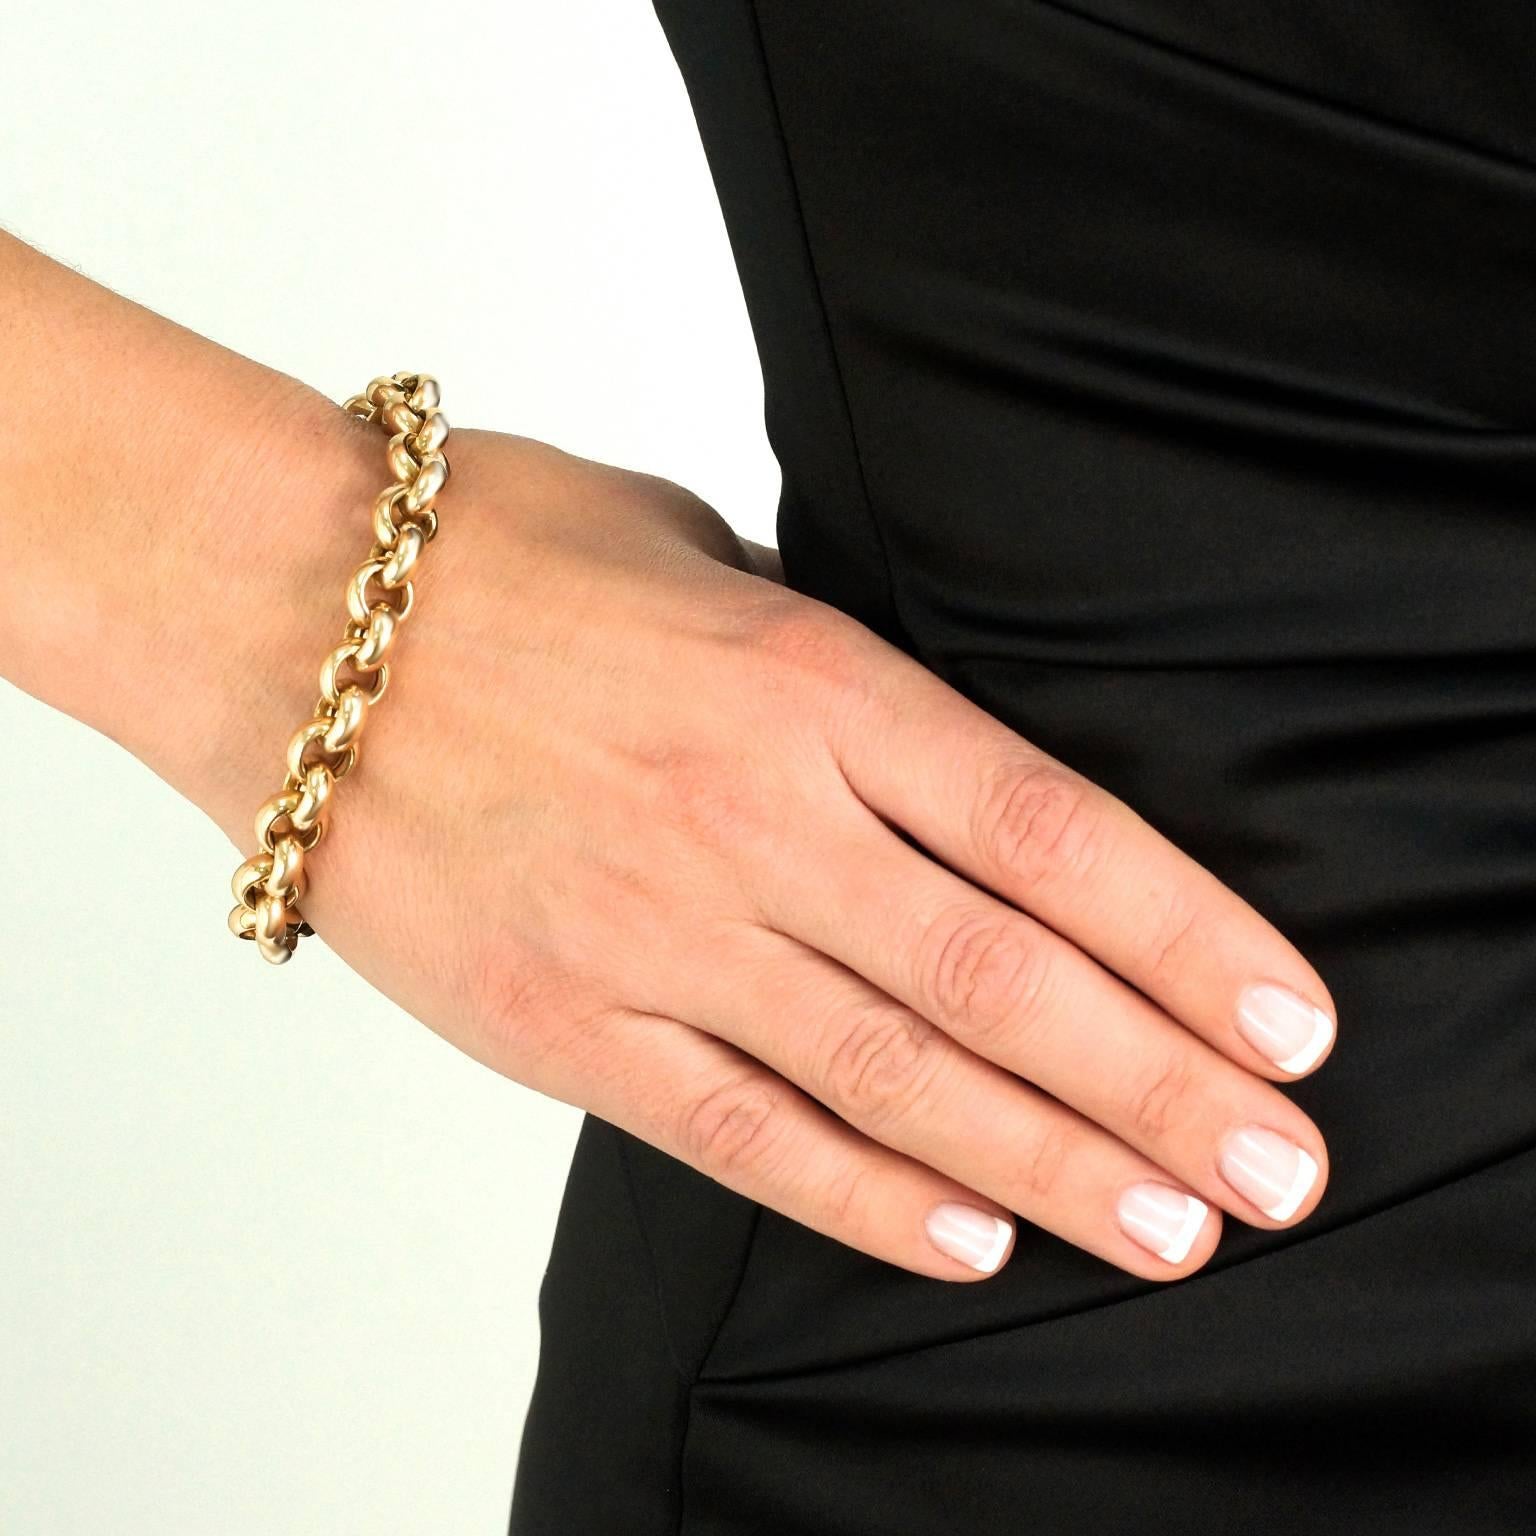 Circa 1980s, 18k, Swiss. A classic rollo link, this bracelet is the perfect wear-anywhere-anytime, everyday piece. Alone, with a watch or other bracelets, a great rollo is a fashion staple. Well made in eighteen-karat yellow gold, this sturdy